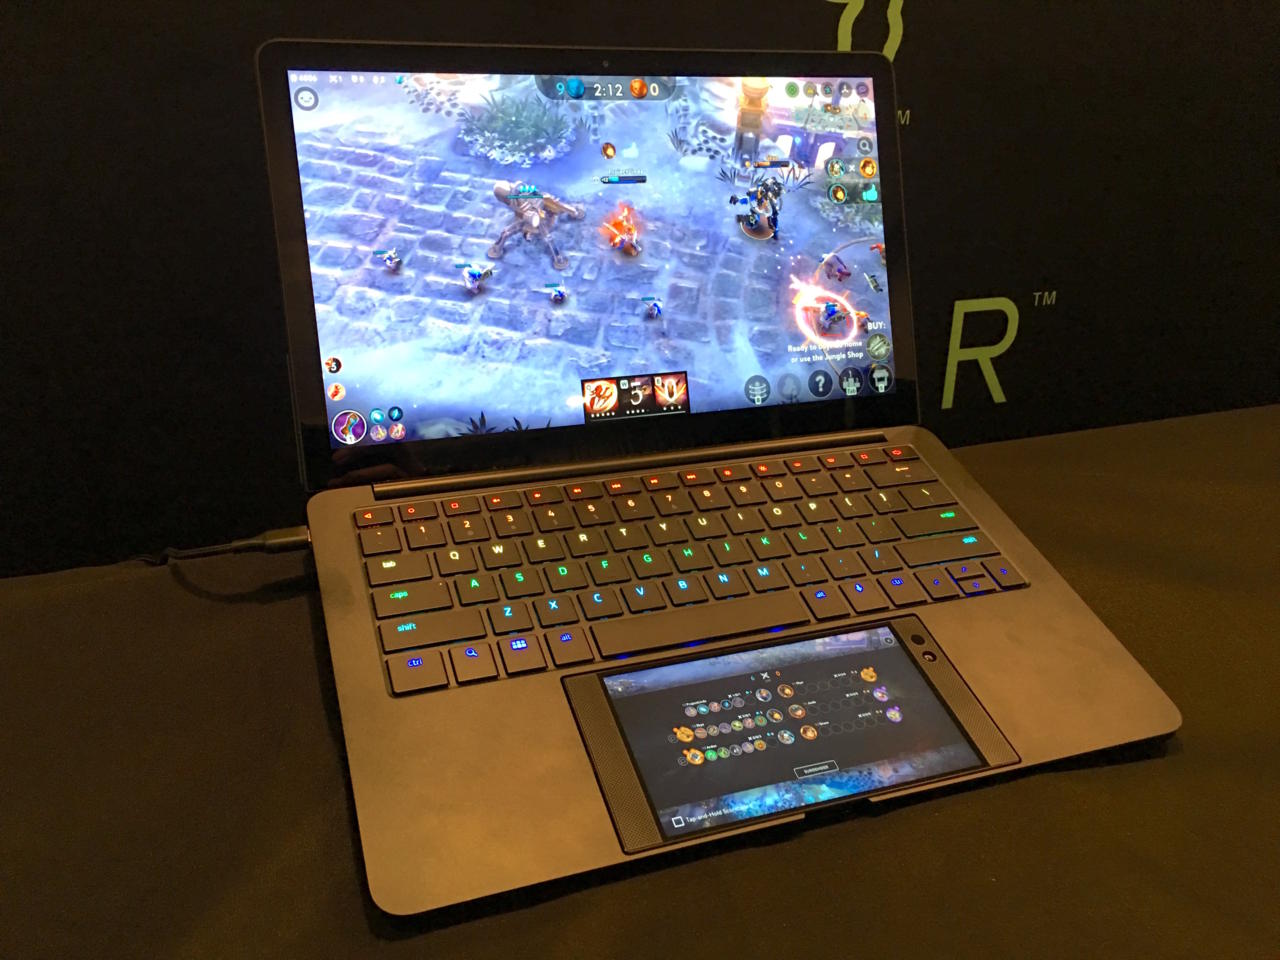 Project Linda running at CES 2018.